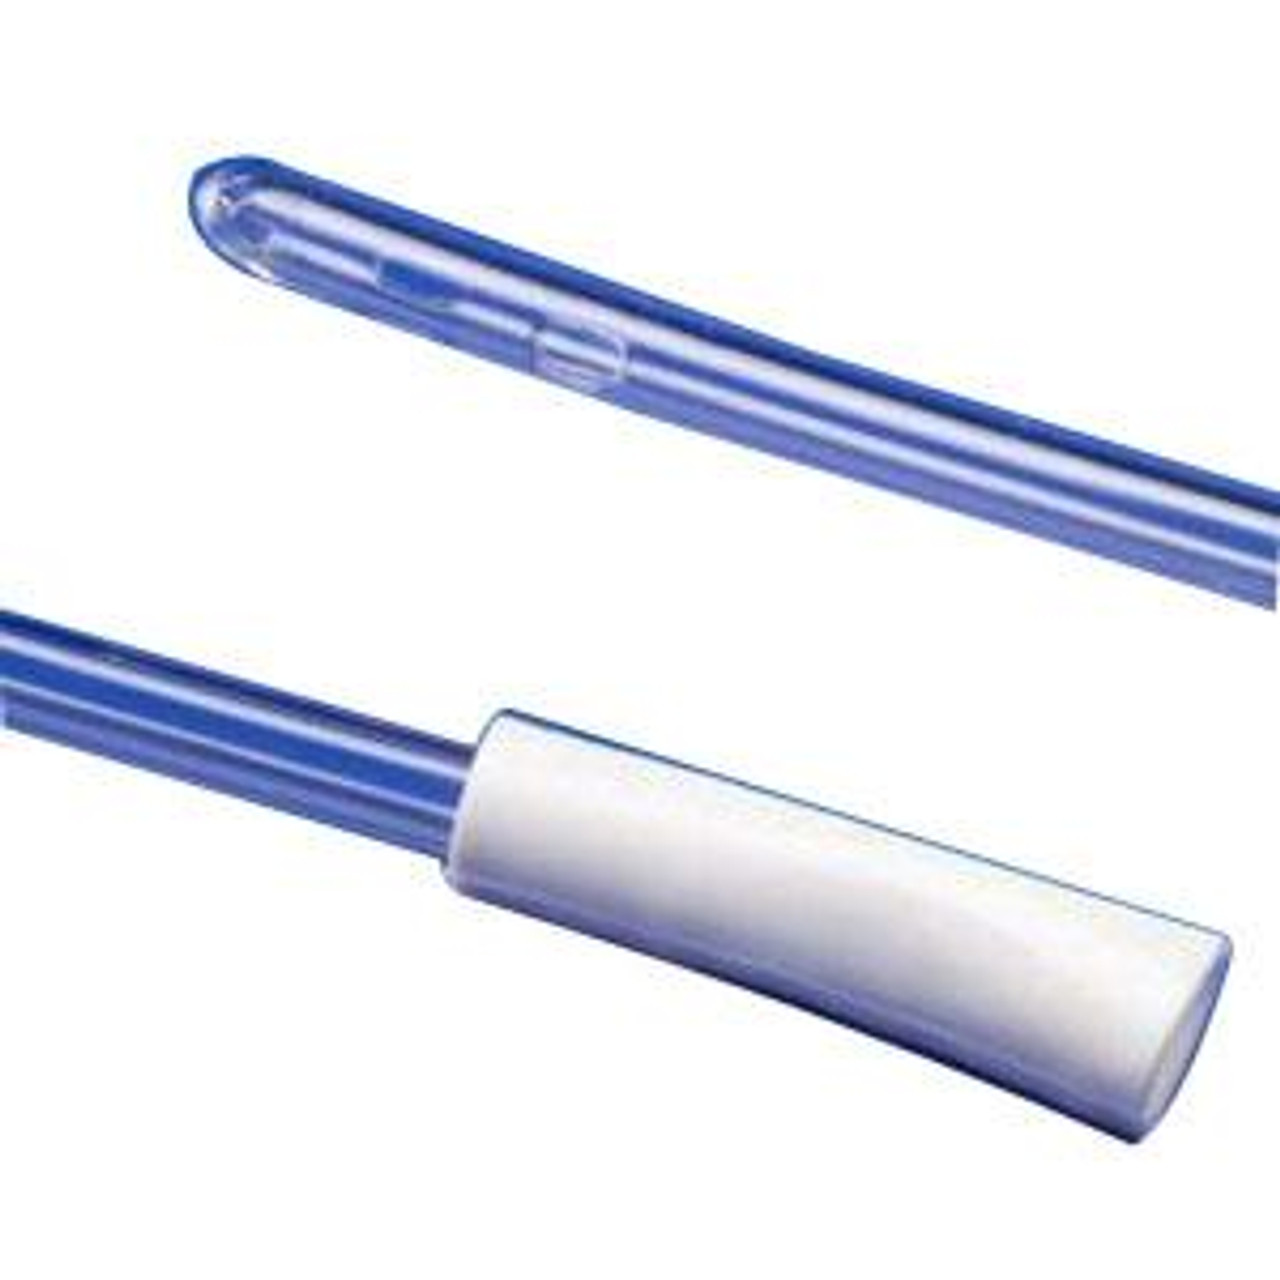 KENDALL 400614 Doverâ„¢ Vinyl Urethral Catheter Integral Funnel, Two Staggered Eyes, Rounded Closed Tip, 14 Fr/Ch (4.7 mm) x 14" (35.6 cm) CS/100